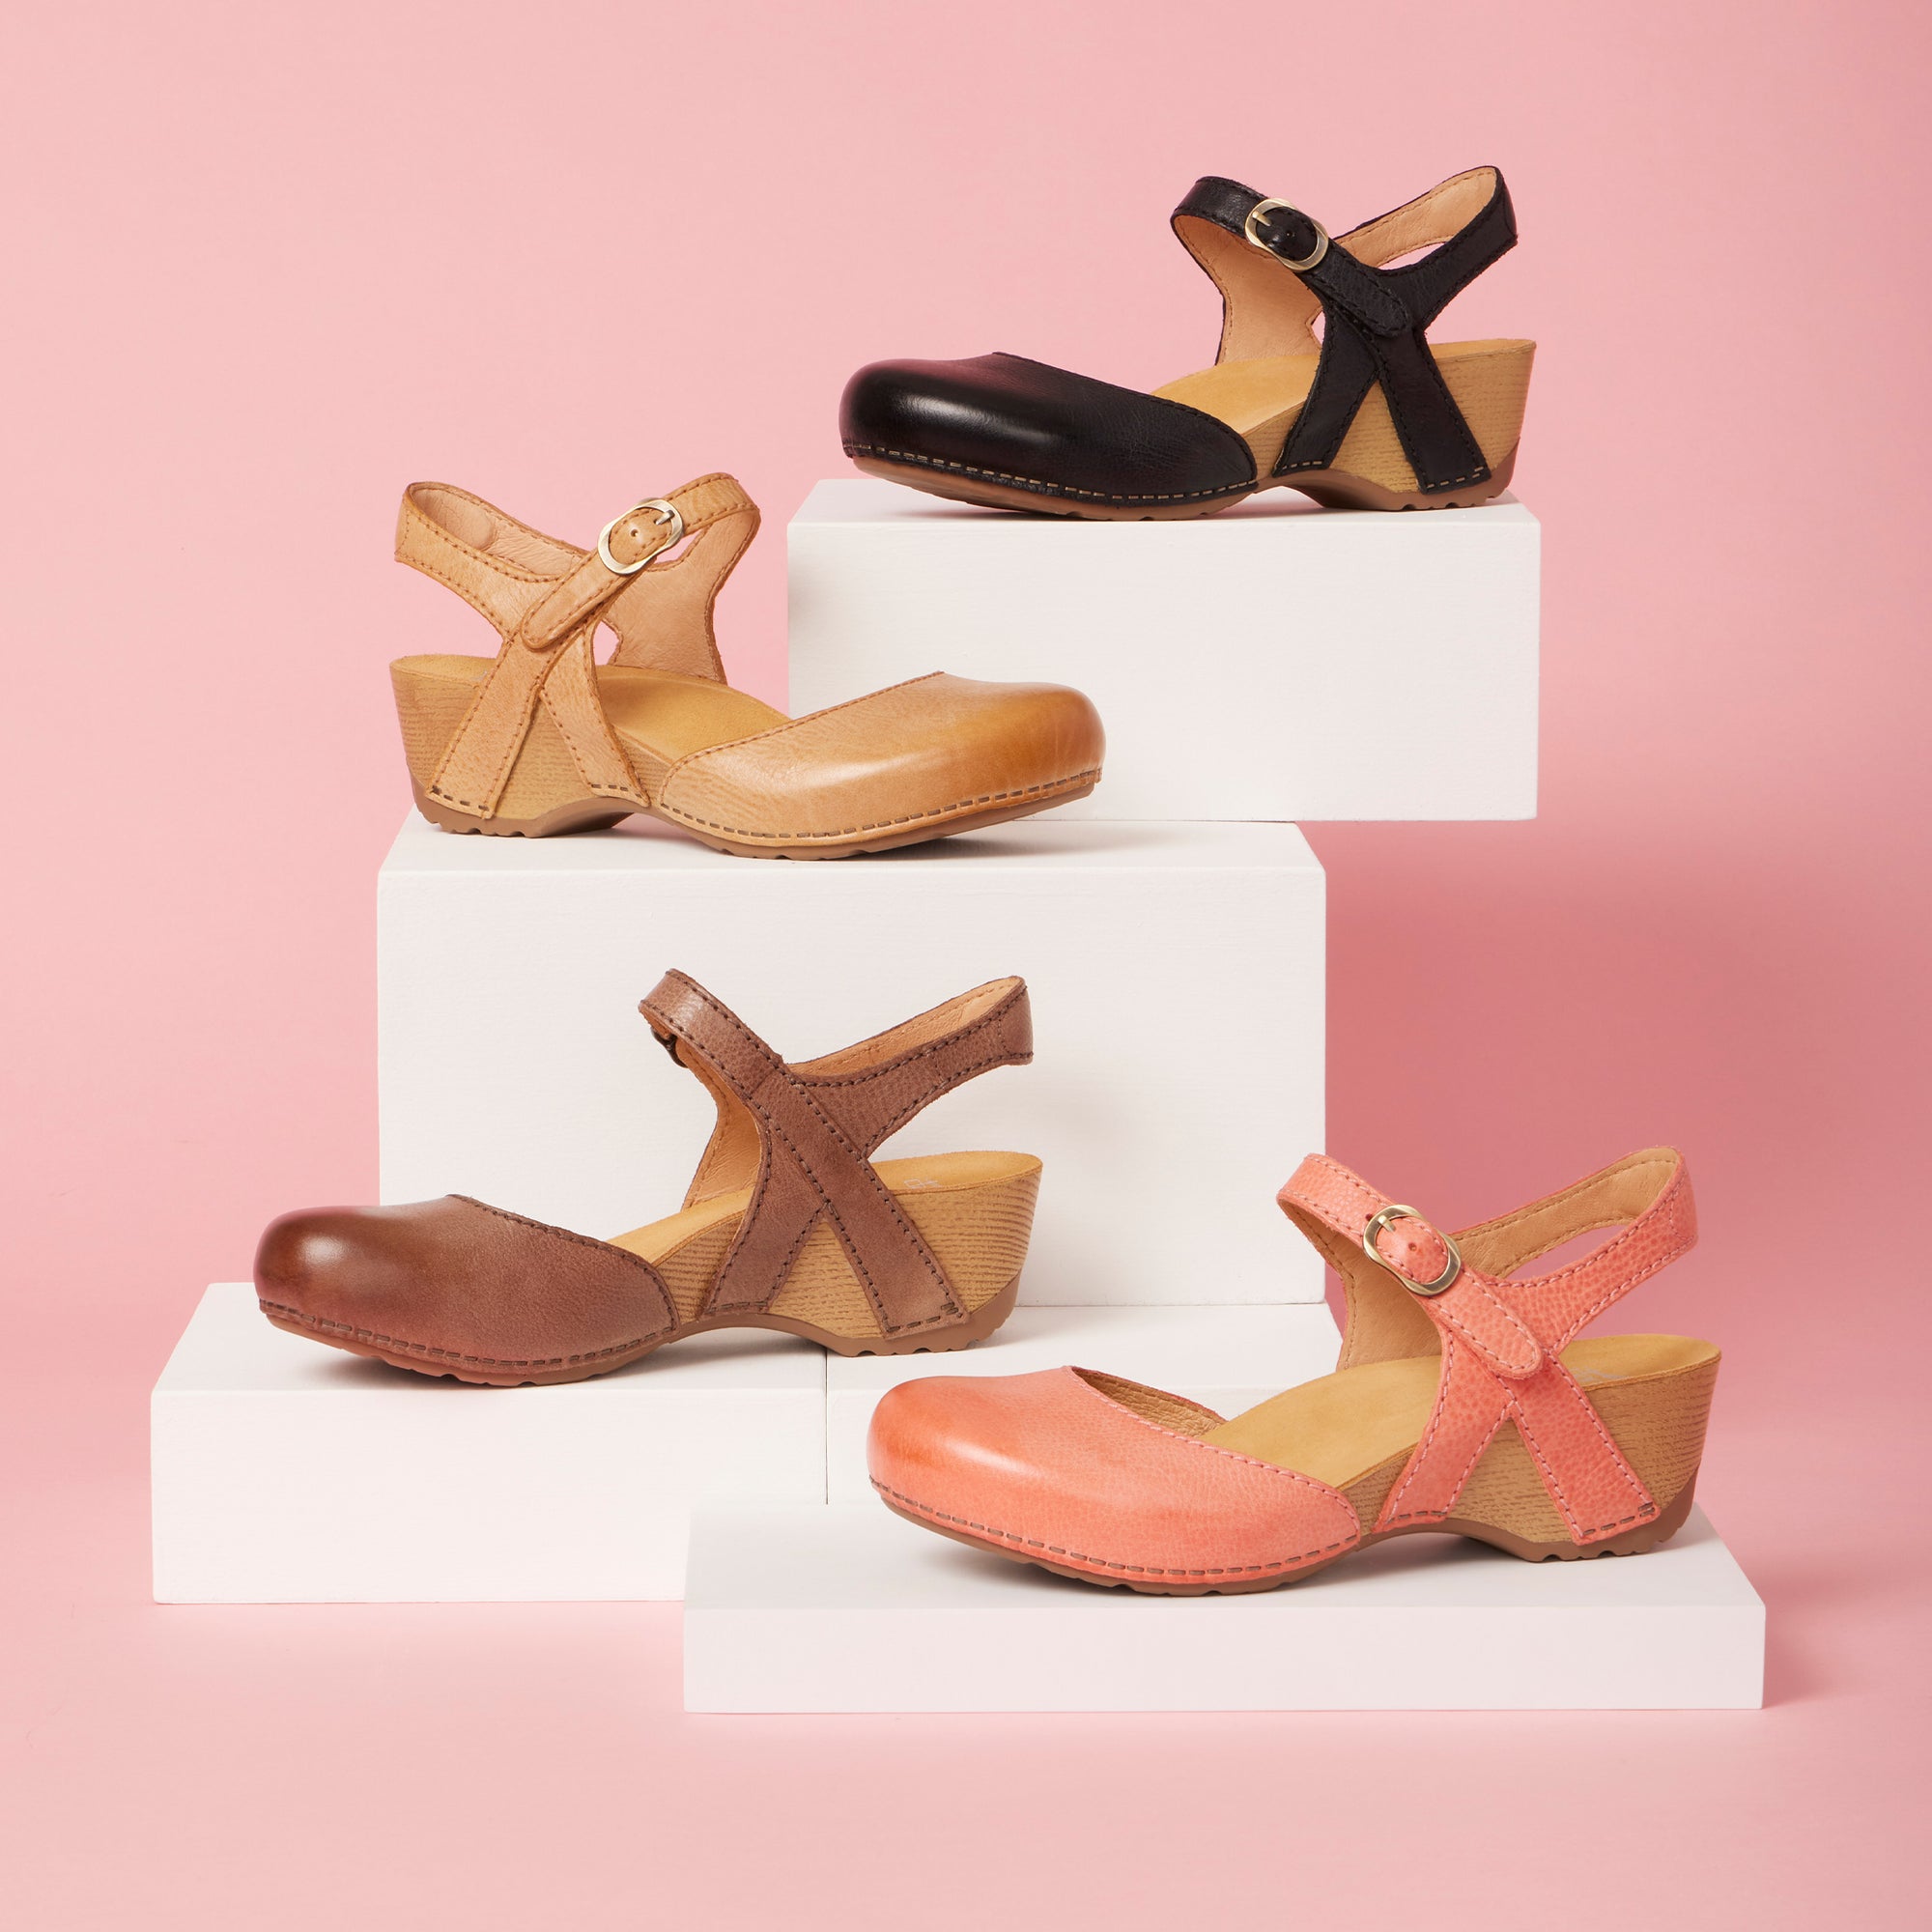 Four colors of a classic Mary Jane flatform sandal in pink, tan, brown, and black.